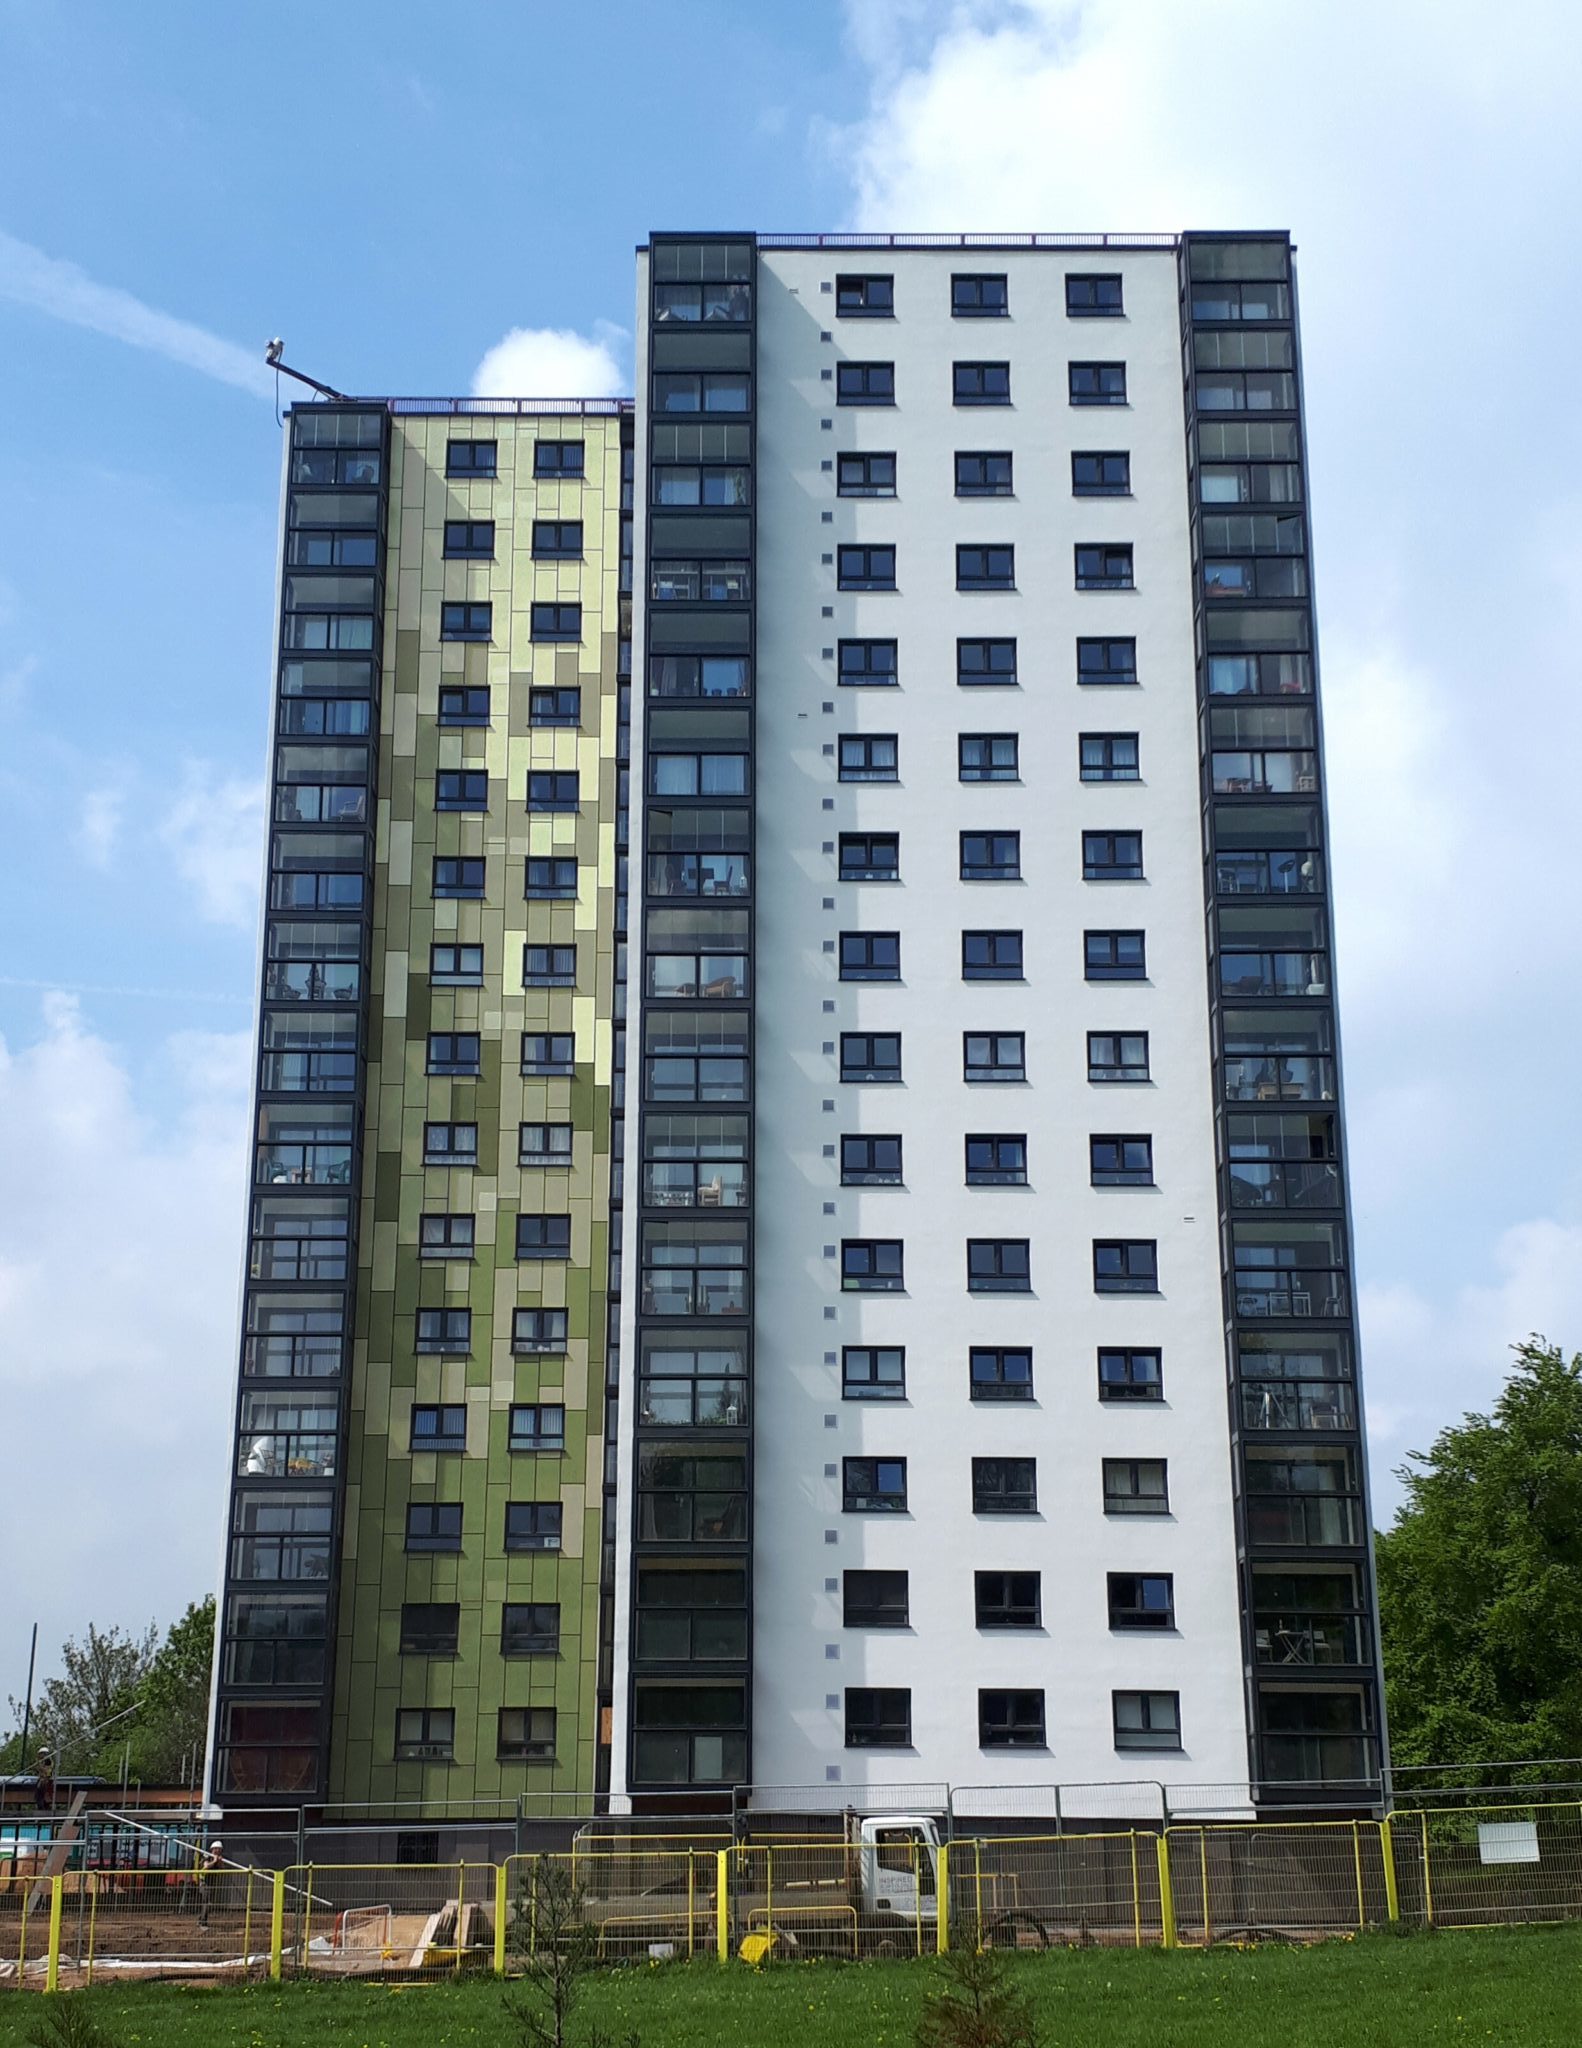 Compliance and performance without compromise – PermaRock Mineral Fibre External Wall Insulation on Nottingham High Rise Blocks